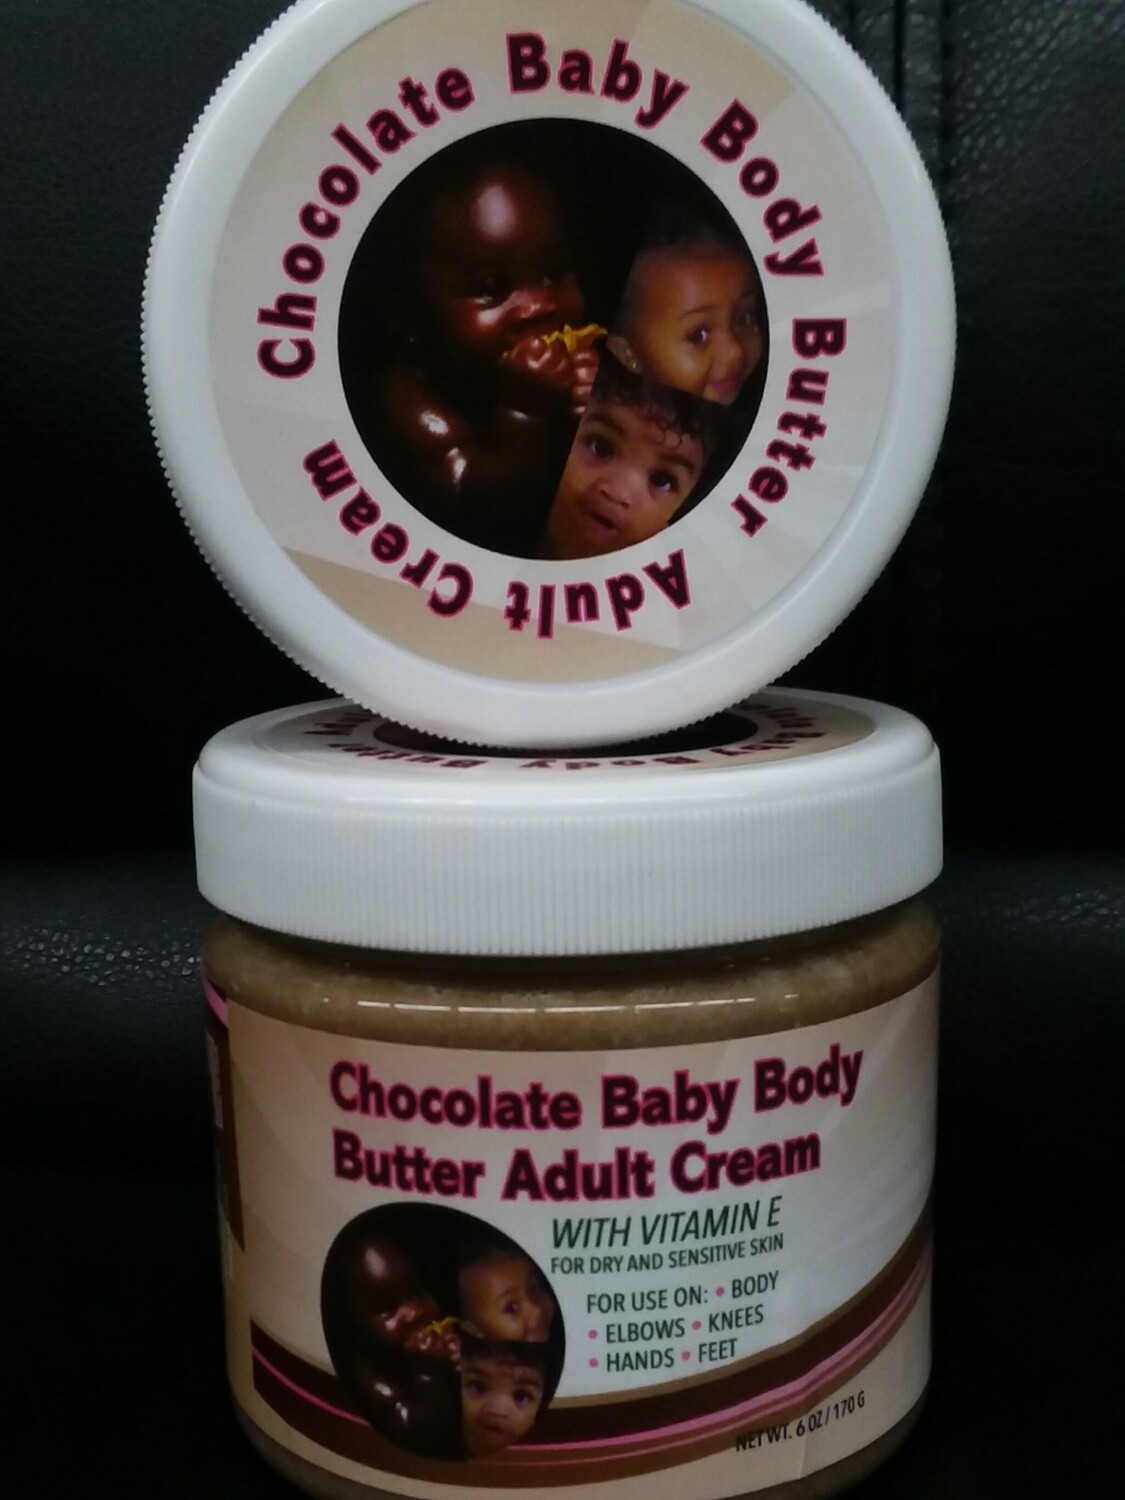 Chocolate Baby Body Butter